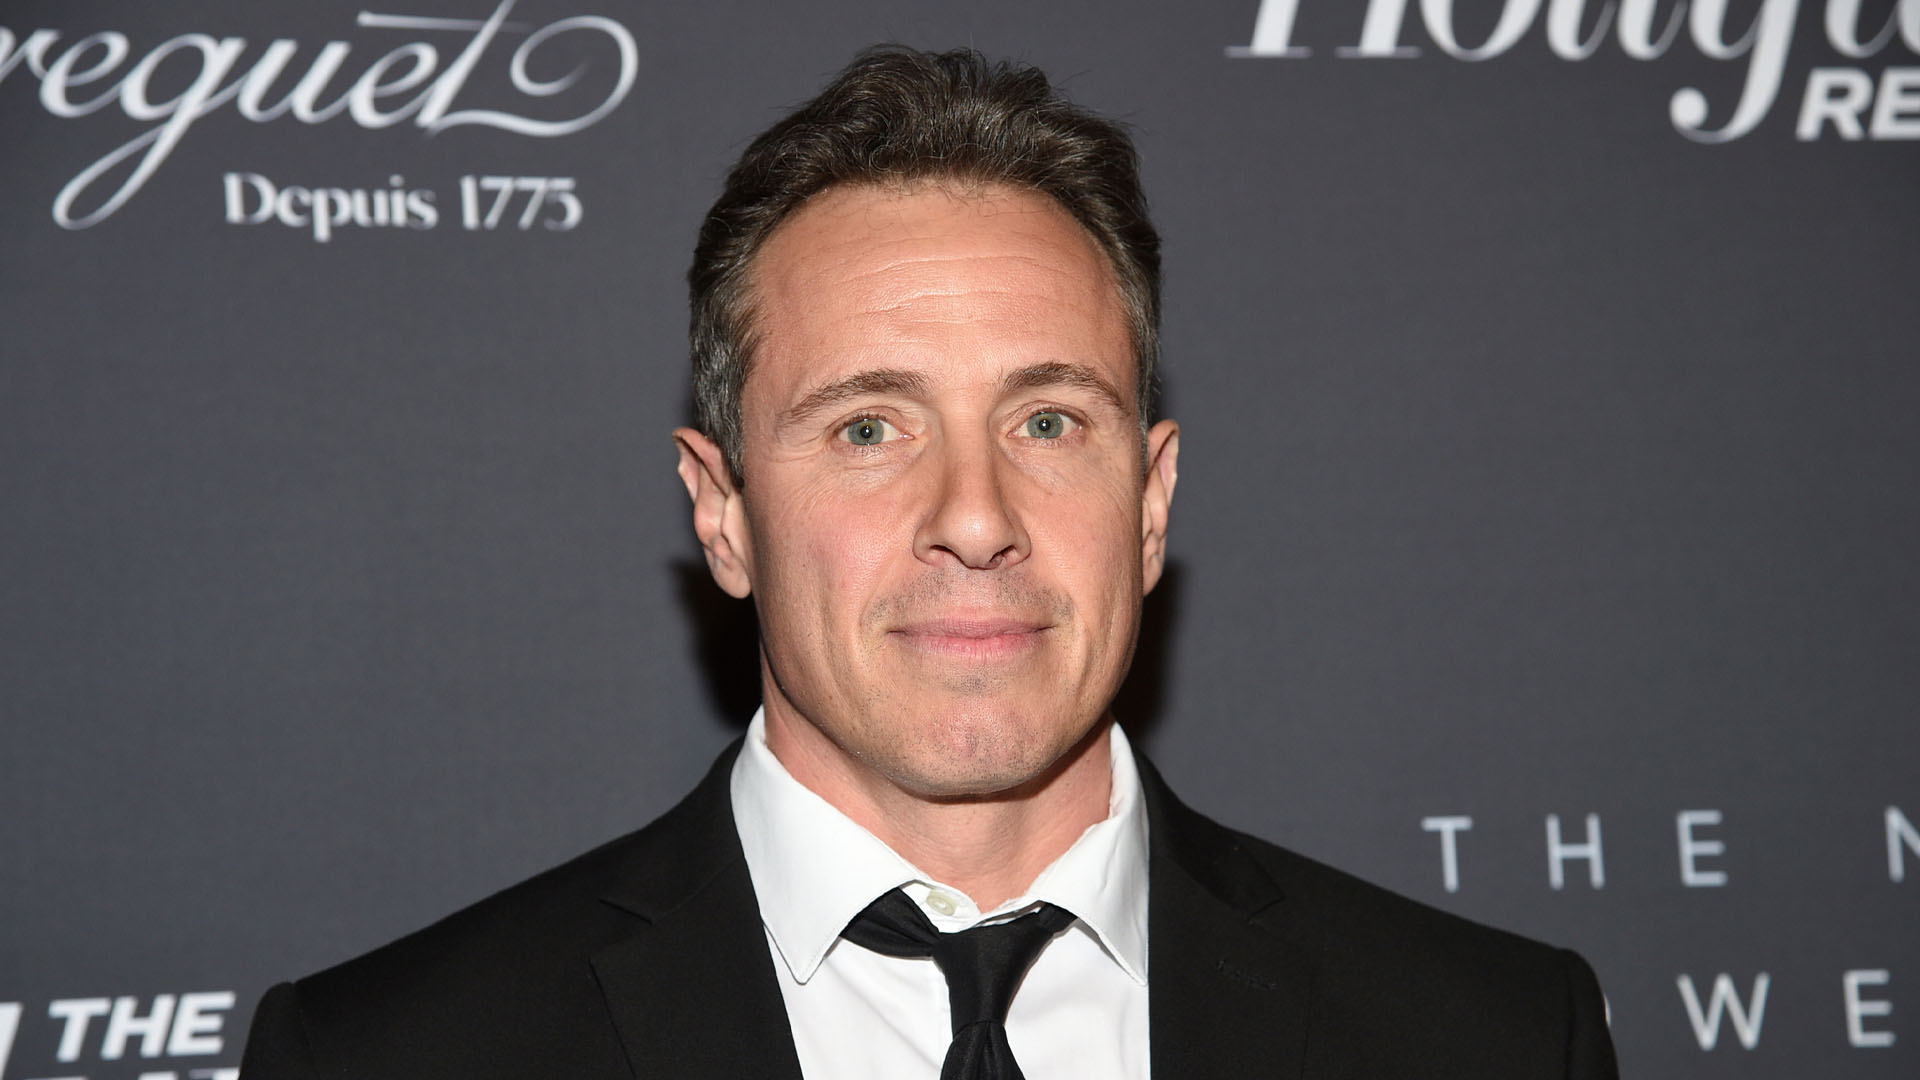 Chris Cuomo is missing. | The Sun